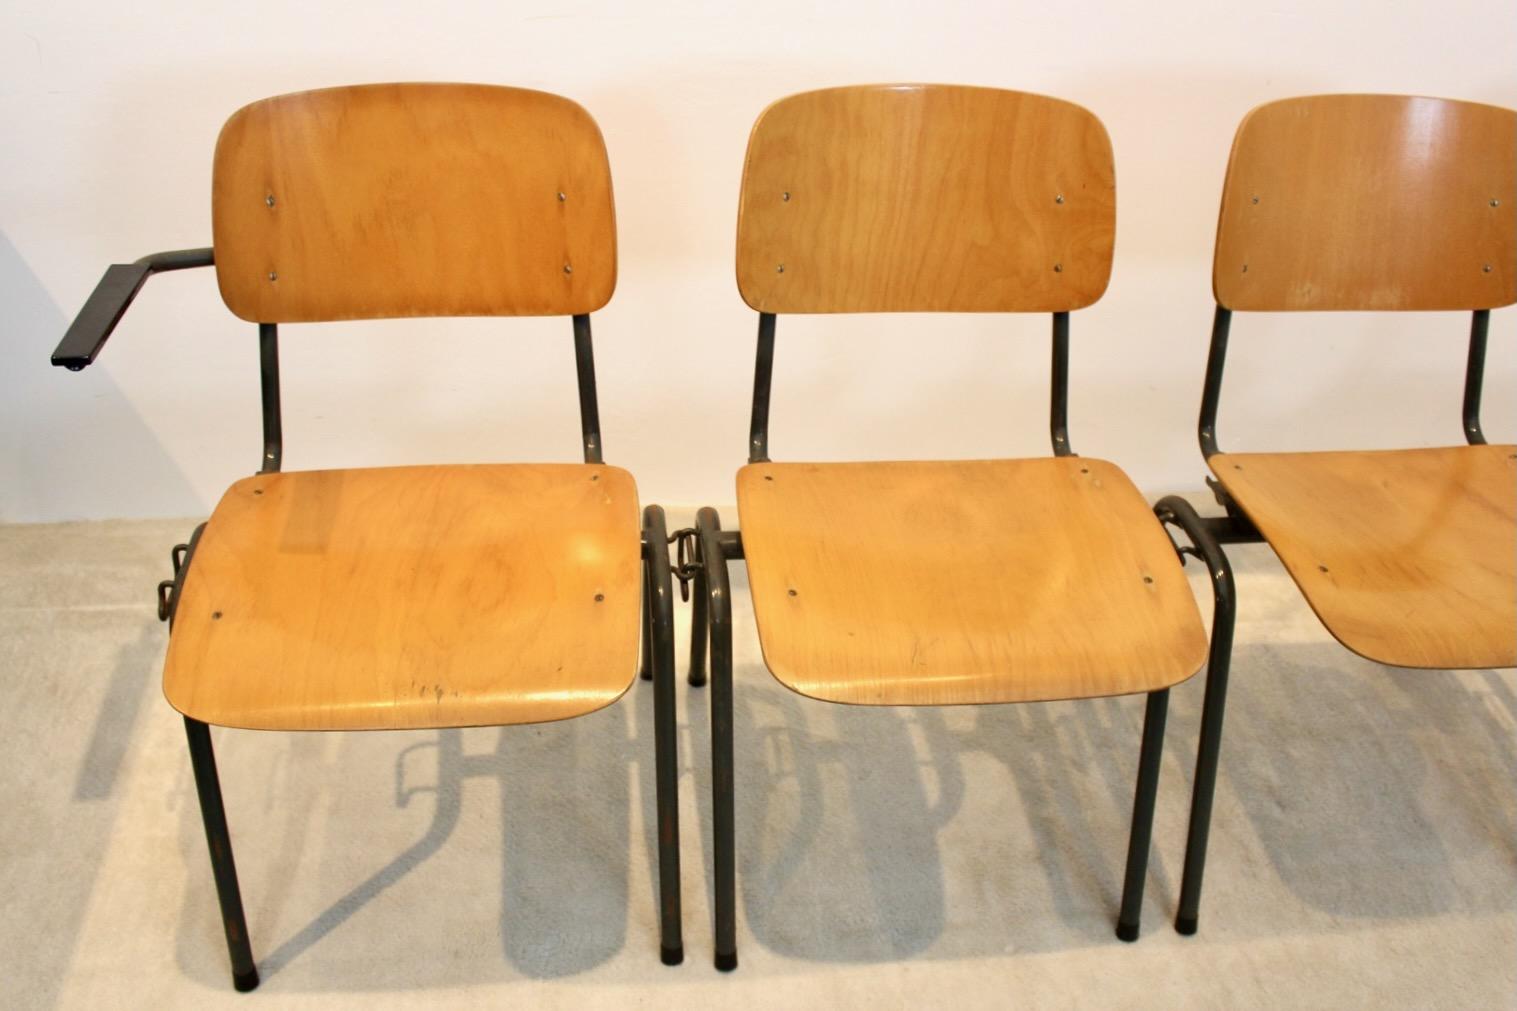 Unique Industrial Plywood Stackable School Sofa Seat by Marko Holland, 1960s For Sale 2